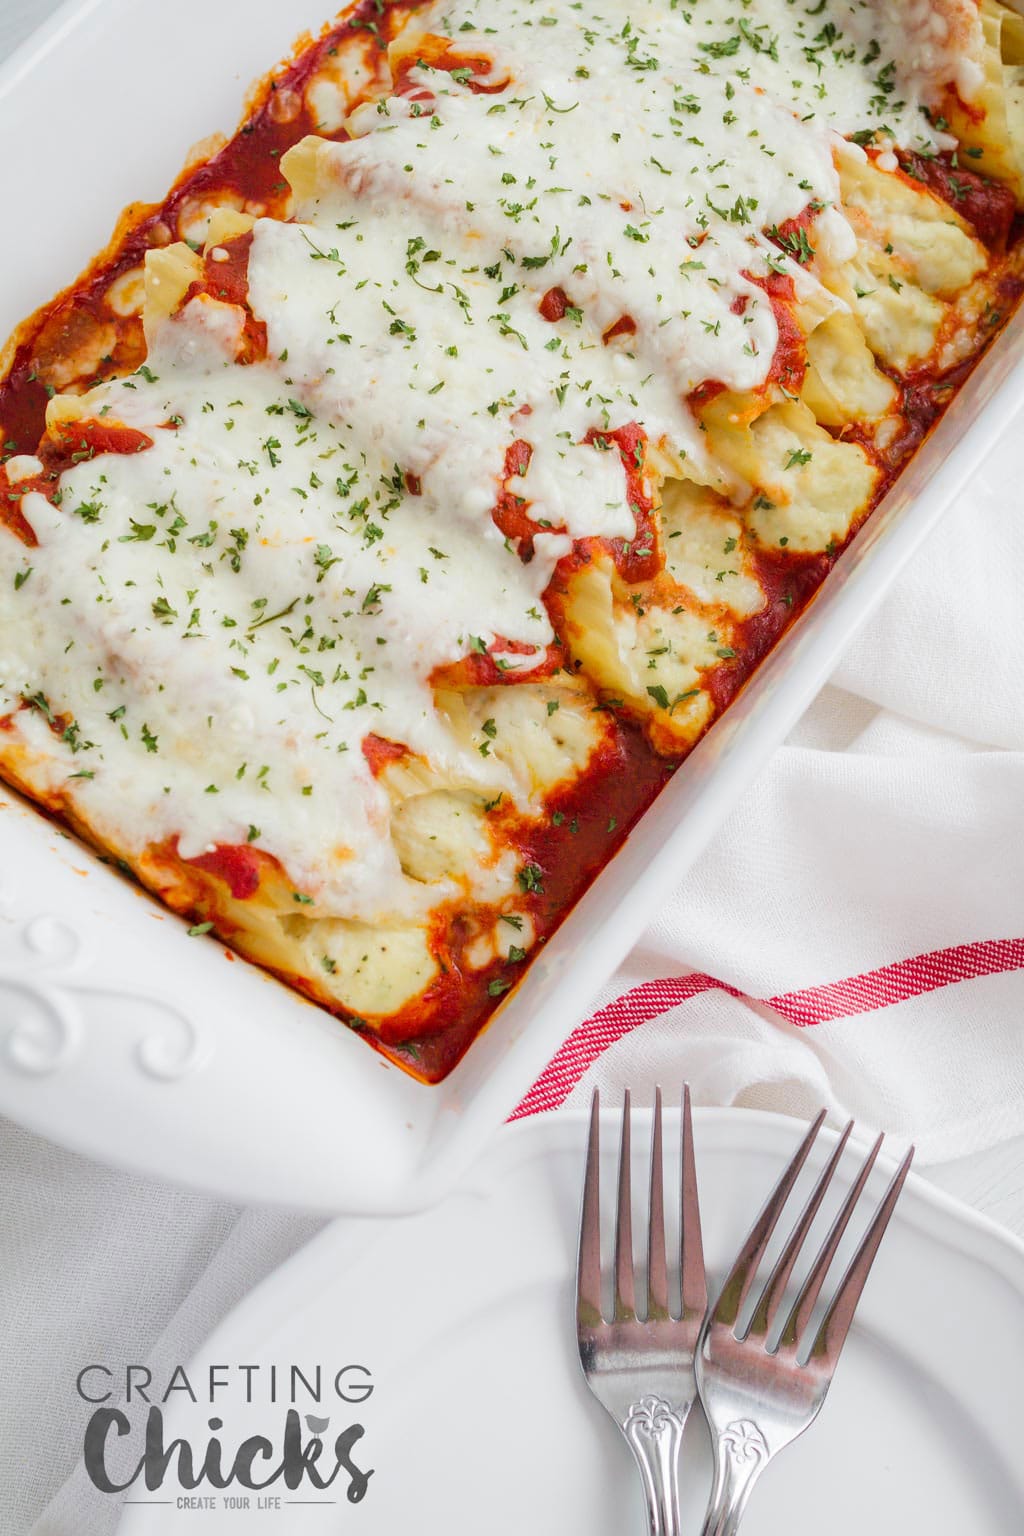 For a delicious and meatless meal, try this classic Manicotti recipe. It is sure to be a crowd pleaser.